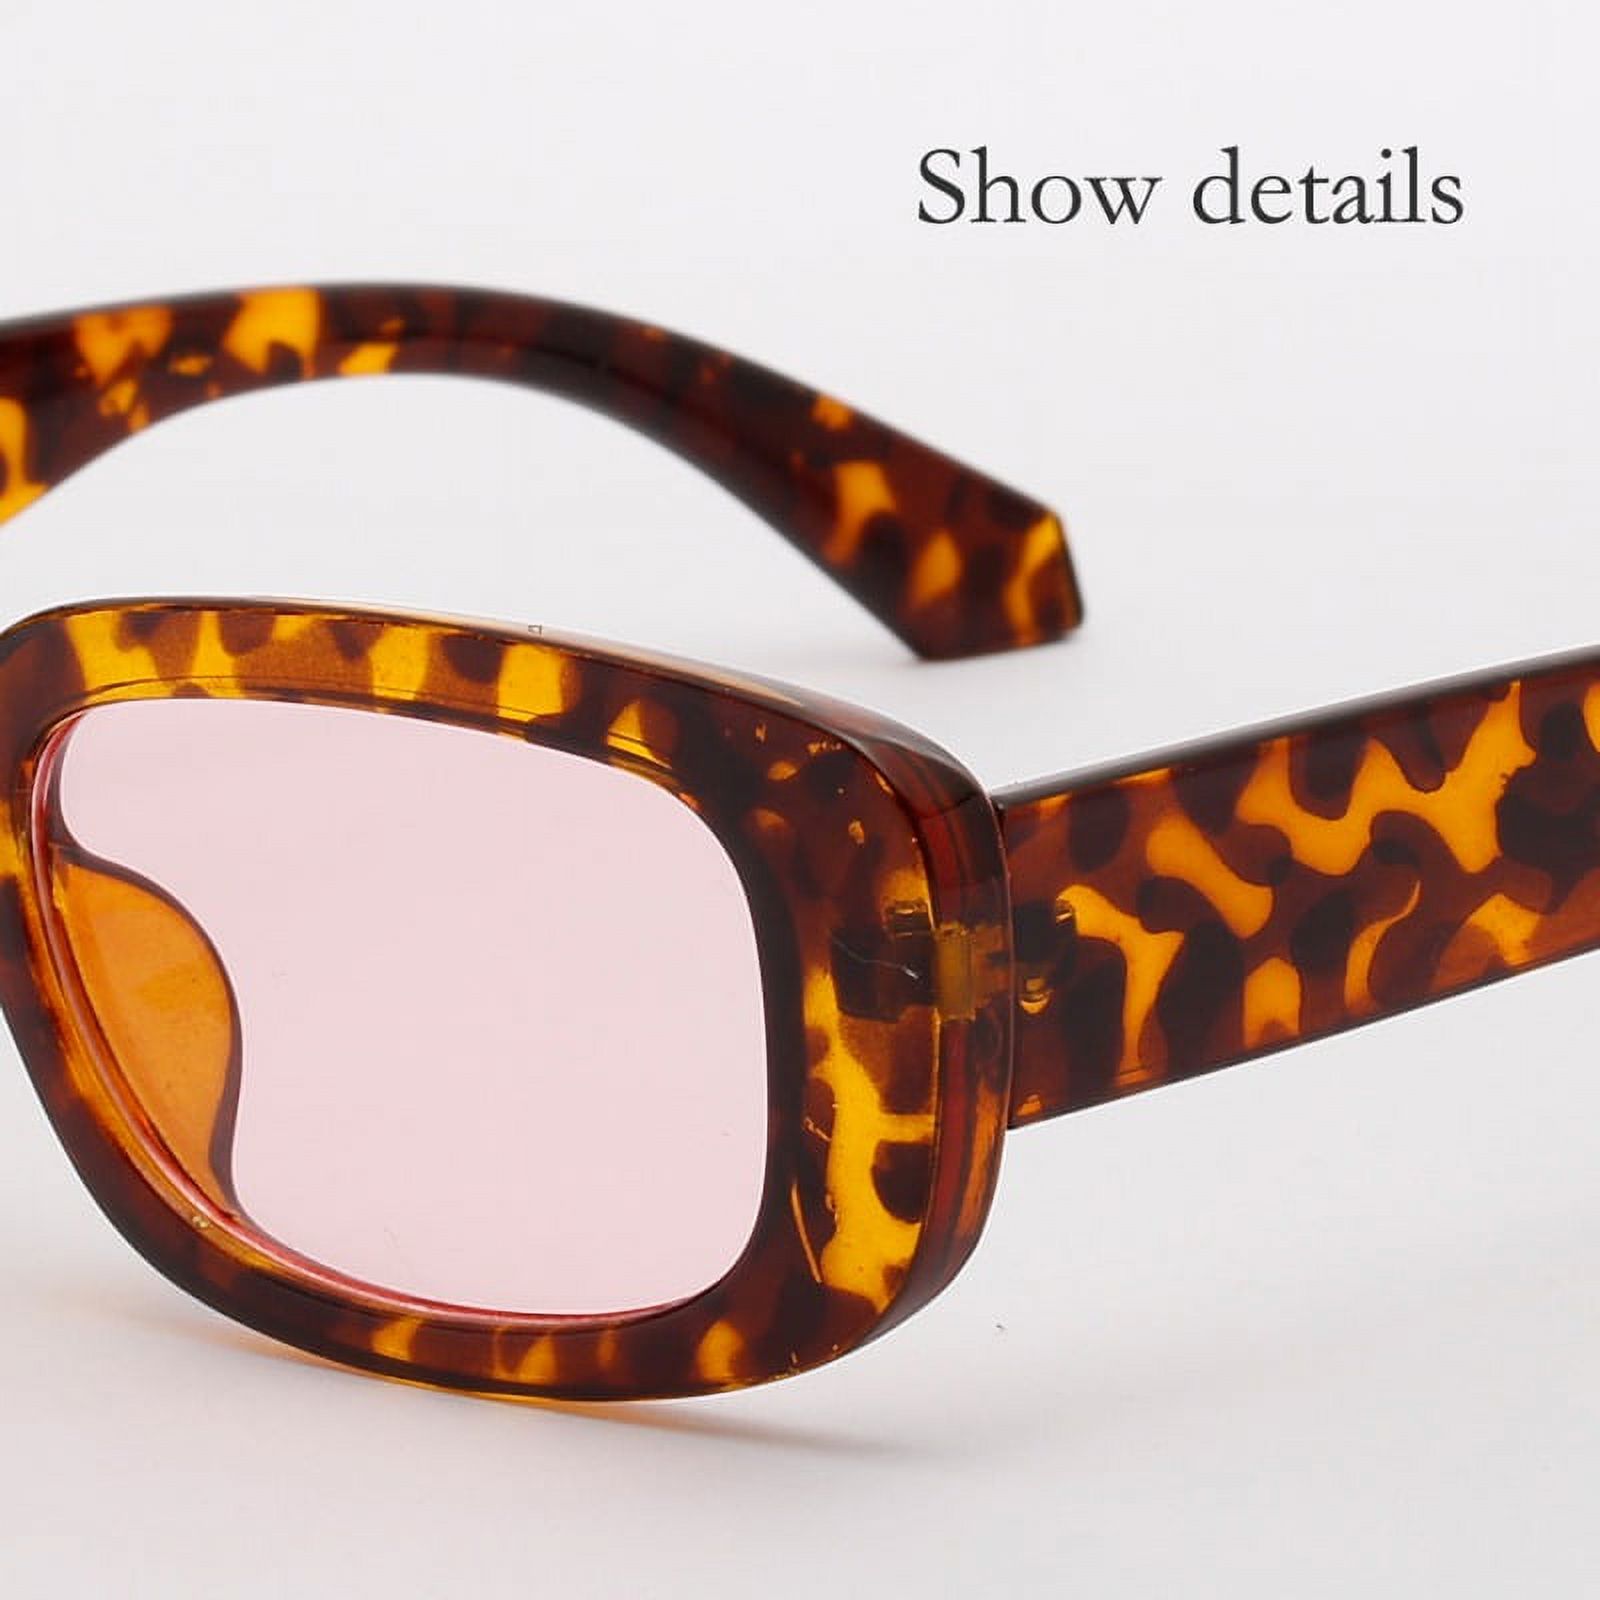 Retro Oval-shaped Hip Hop Clear Casual Colored Lens Festival Fashion Sunglasses for Women Men - image 5 of 6